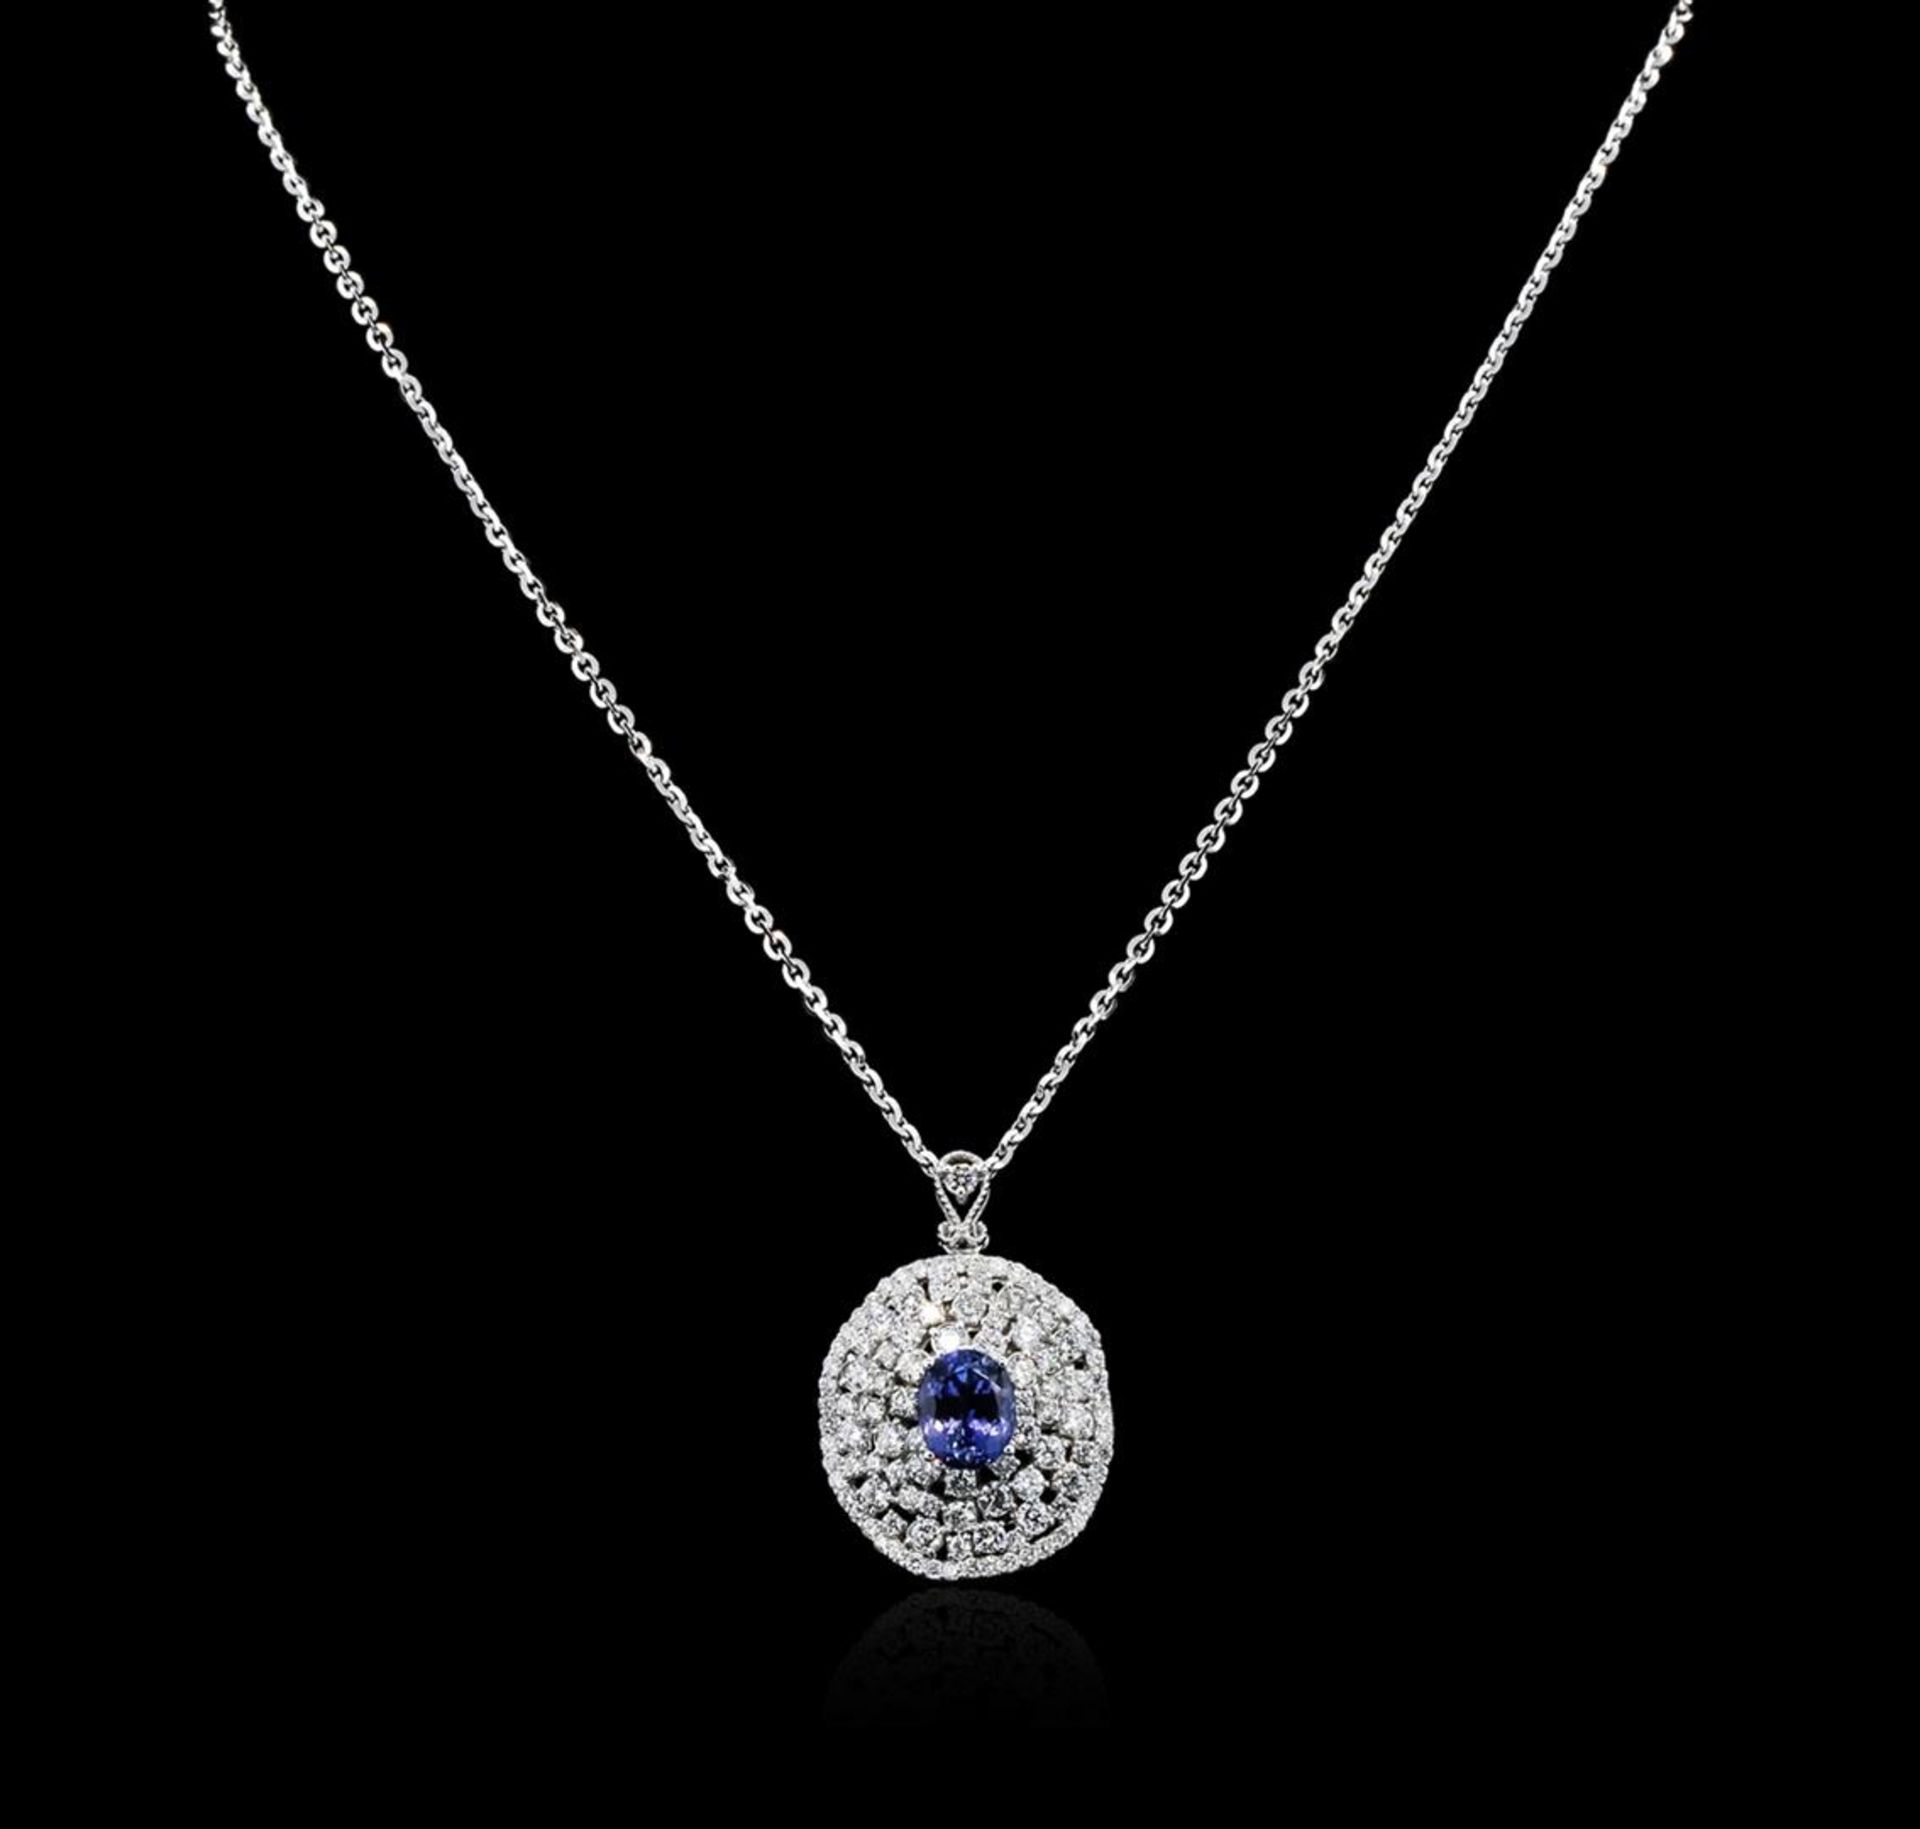 14KT White Gold 3.57 ctw Tanzanite and Diamond Pendant With Chain - Image 2 of 4